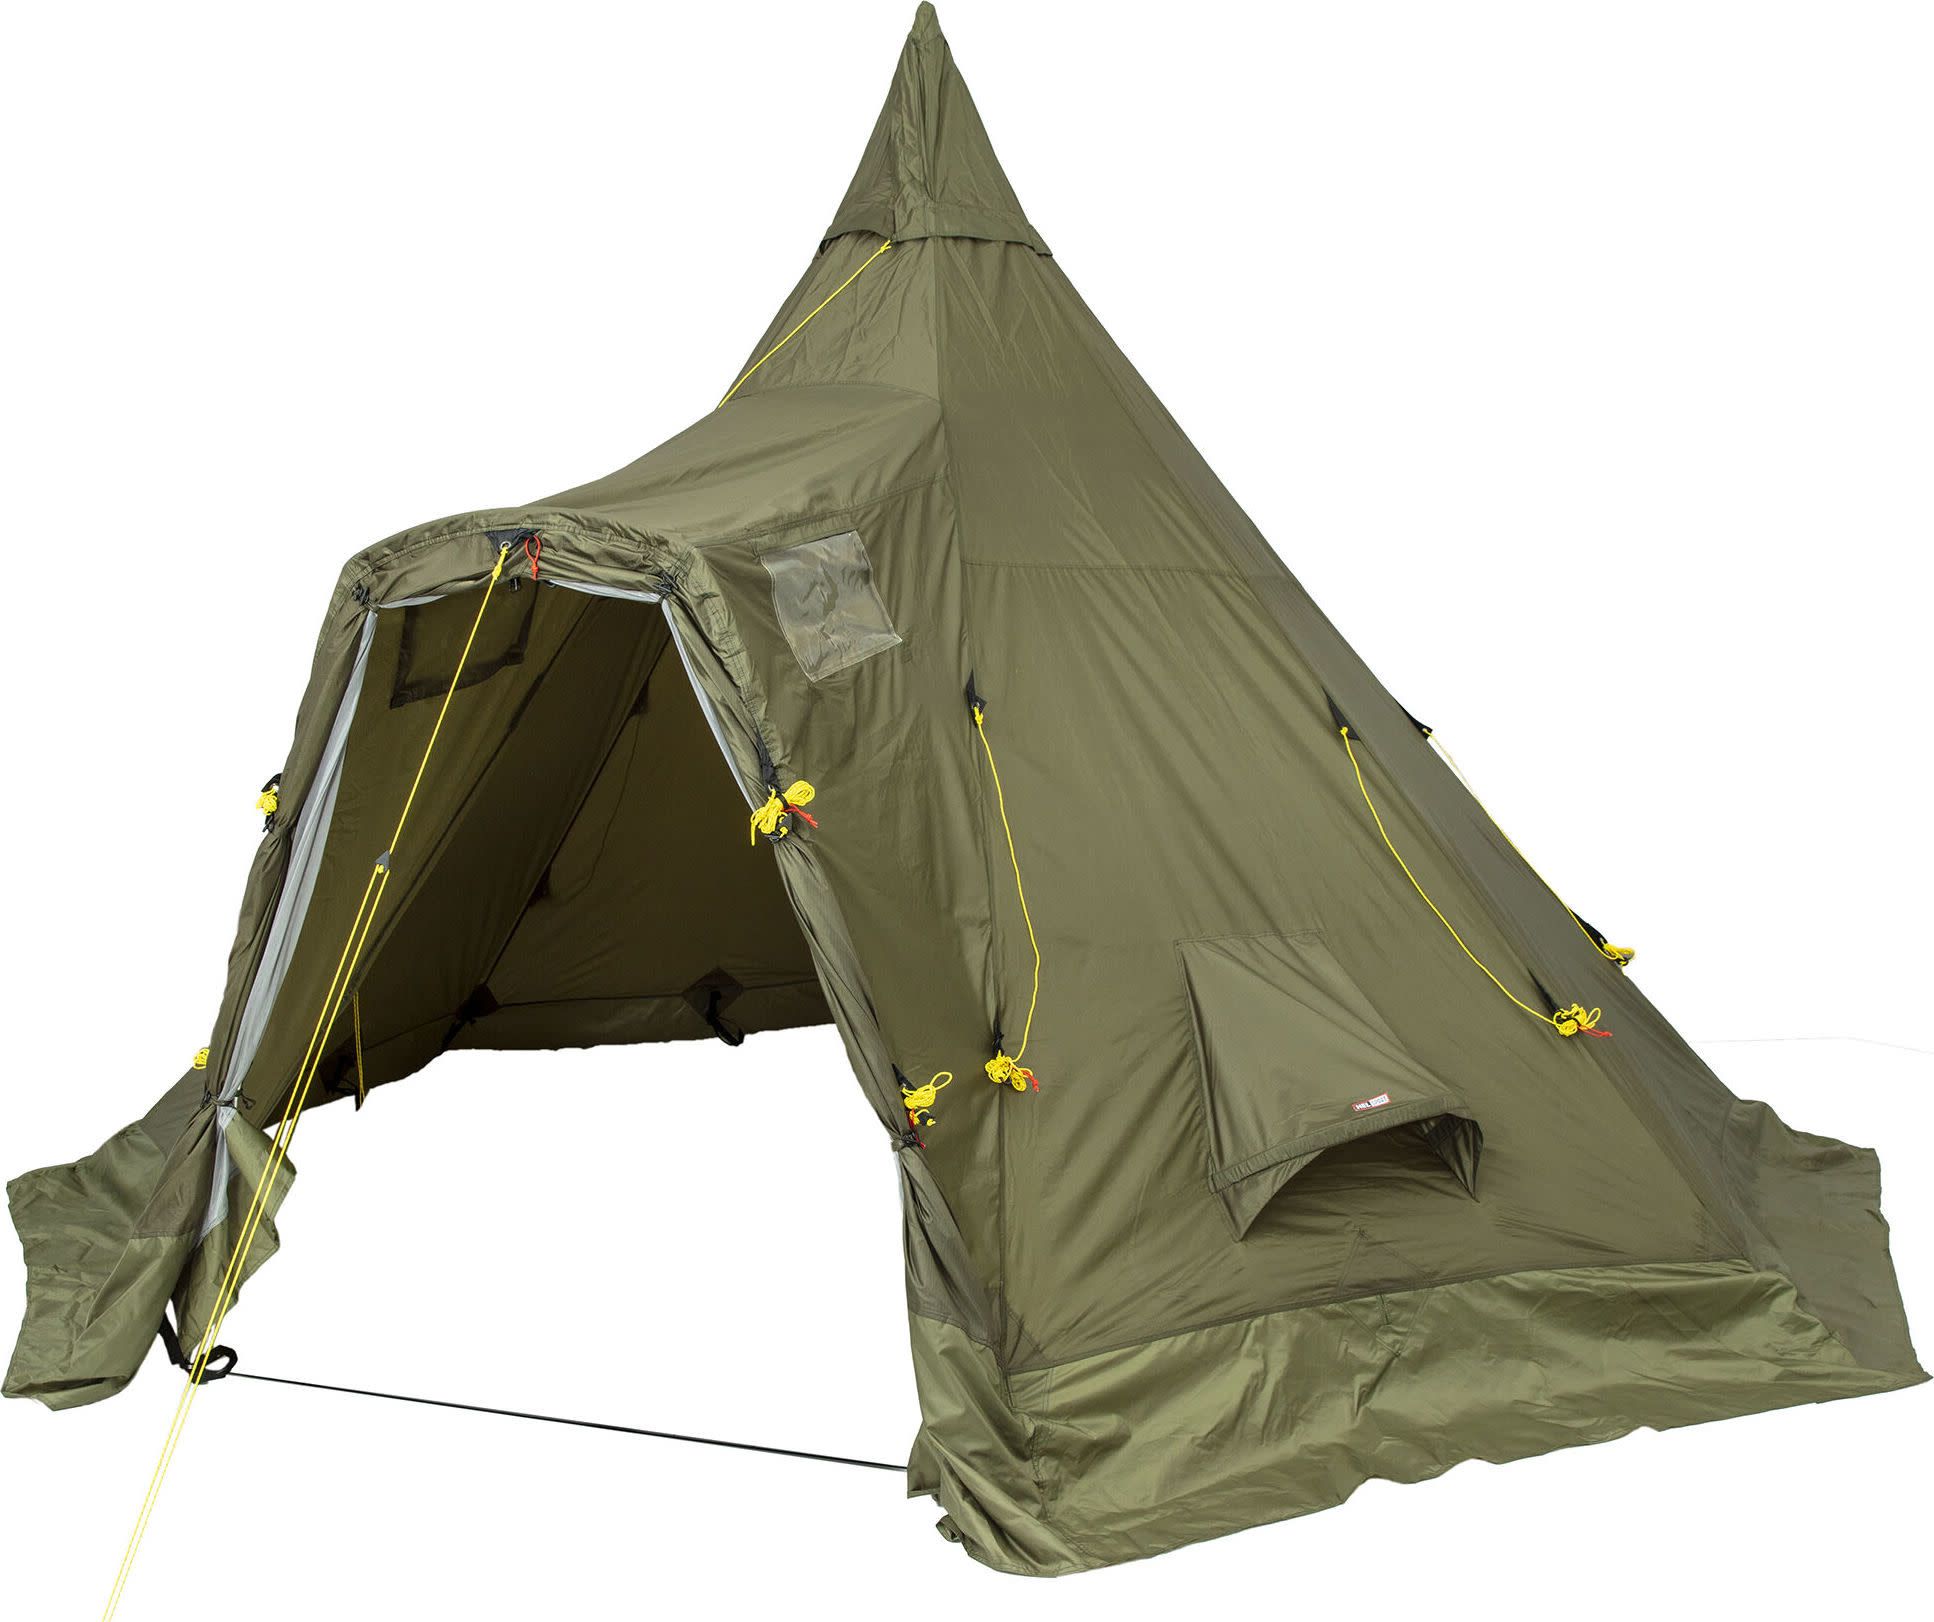 Varanger 4-6 Camp Outer Tent Incl. Pole green, Buy Varanger 4-6 Camp Outer  Tent Incl. Pole green here